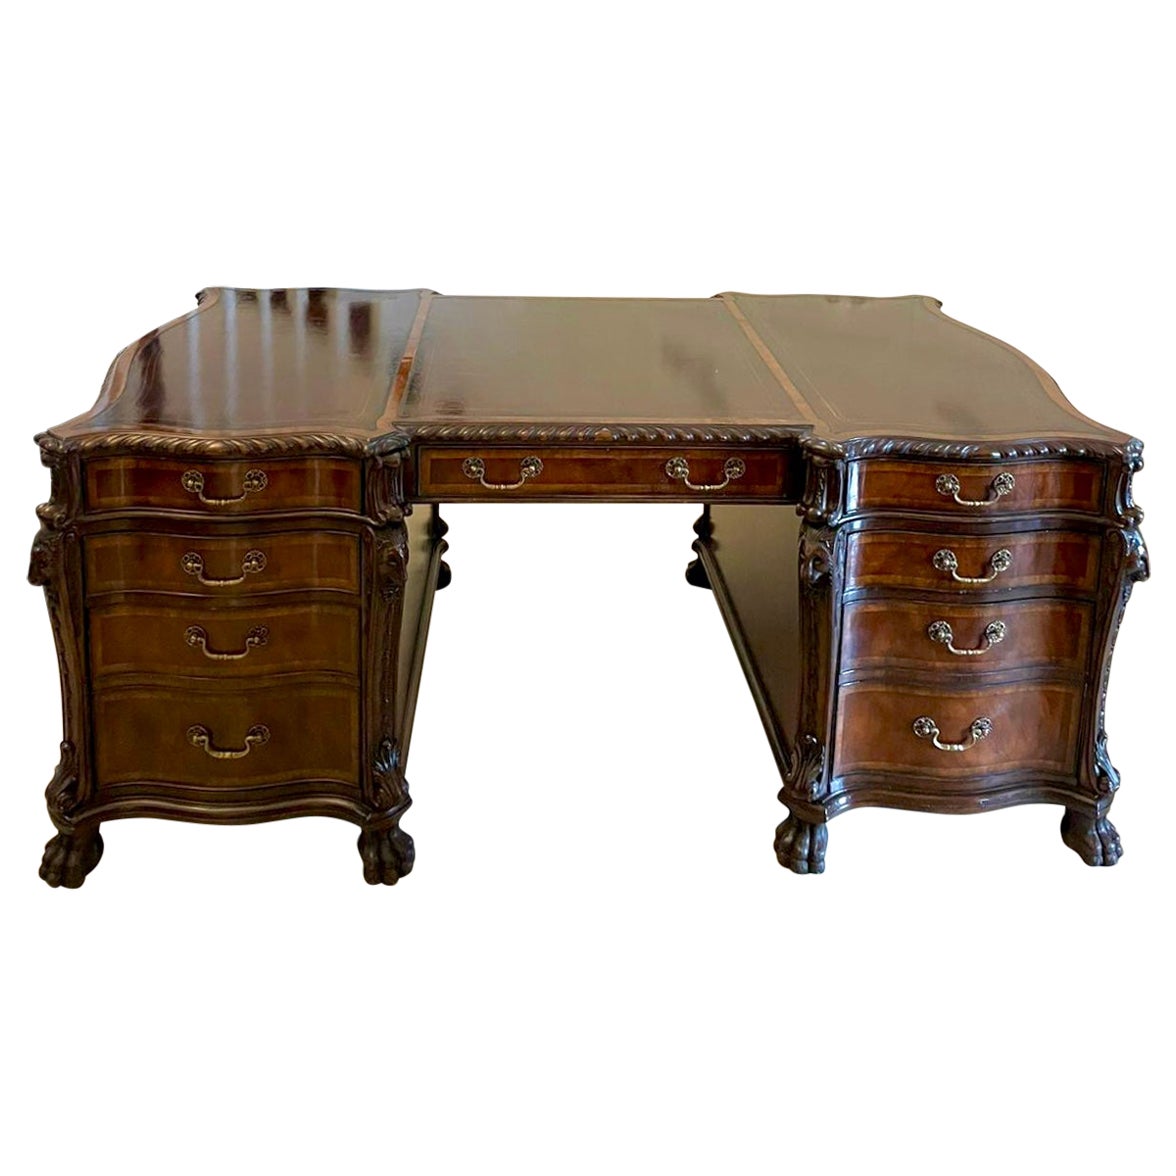 Outstanding Quality Large Antique Mahogany Serpentine Shaped Partners Desk For Sale